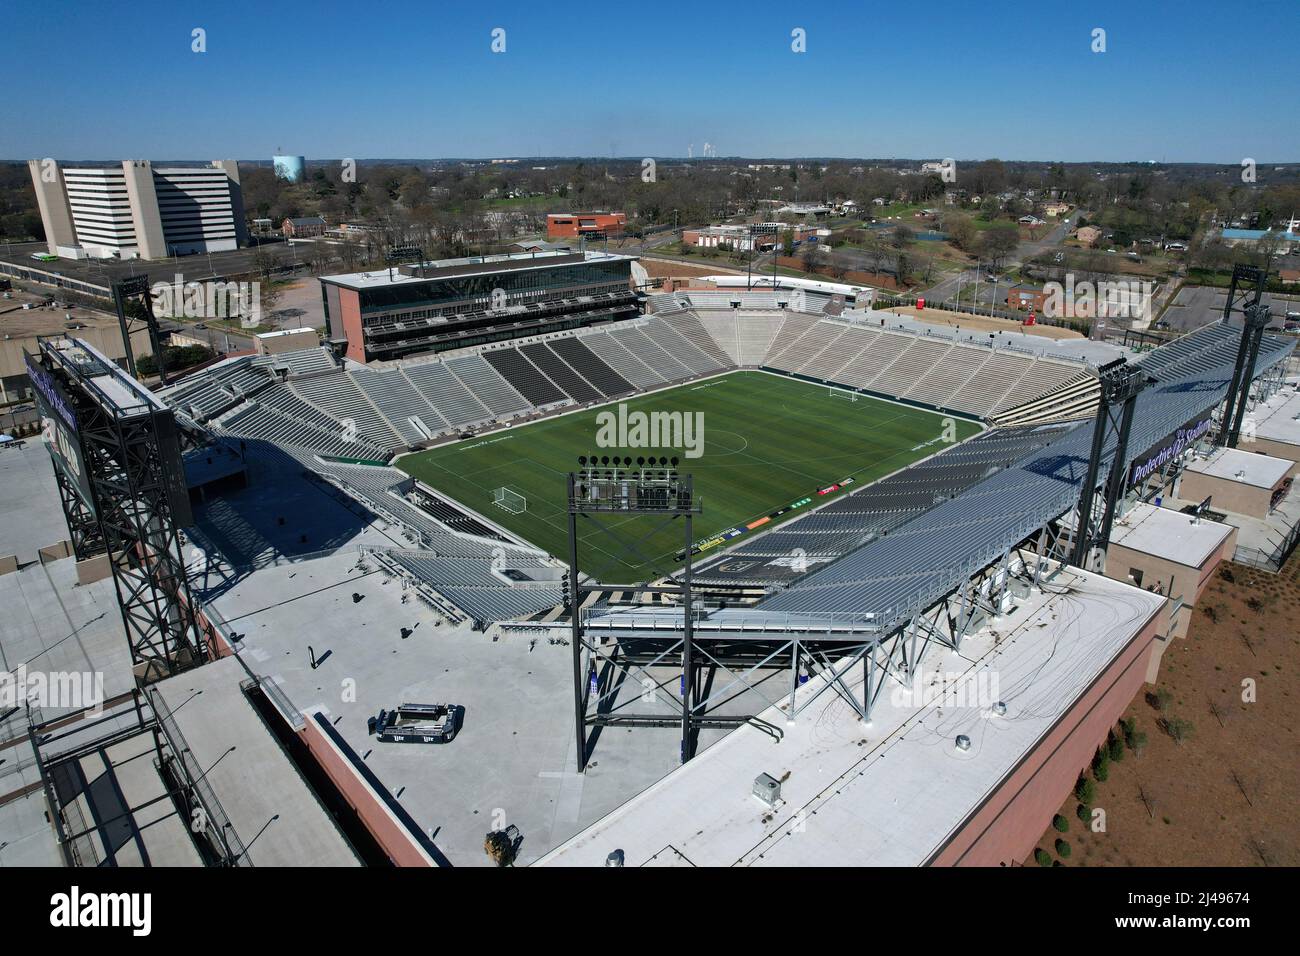 An aerial view of Protective Stadium, Sunday, Mar. 13, 2022, in Birmingham, Ala. The stadium is the home of the UAB Blazers football team and the USFL Stock Photo